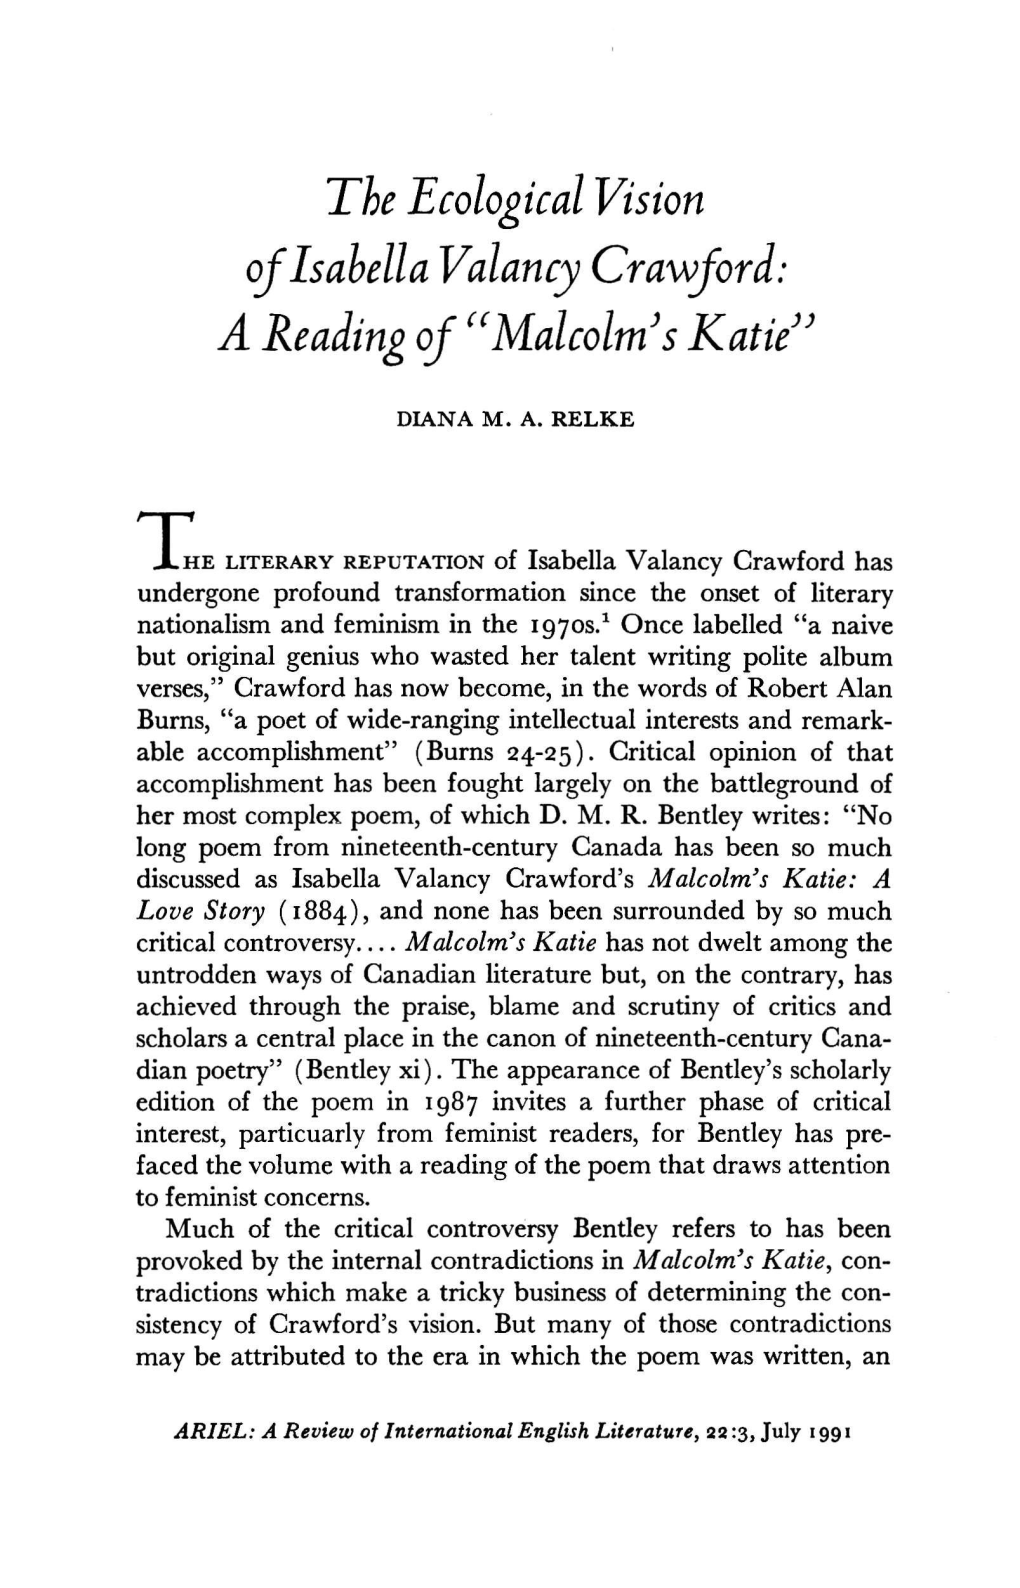 The Ecological Vision of Isahella Valancy Crawford: a Reading of "Malcolm*S Katie